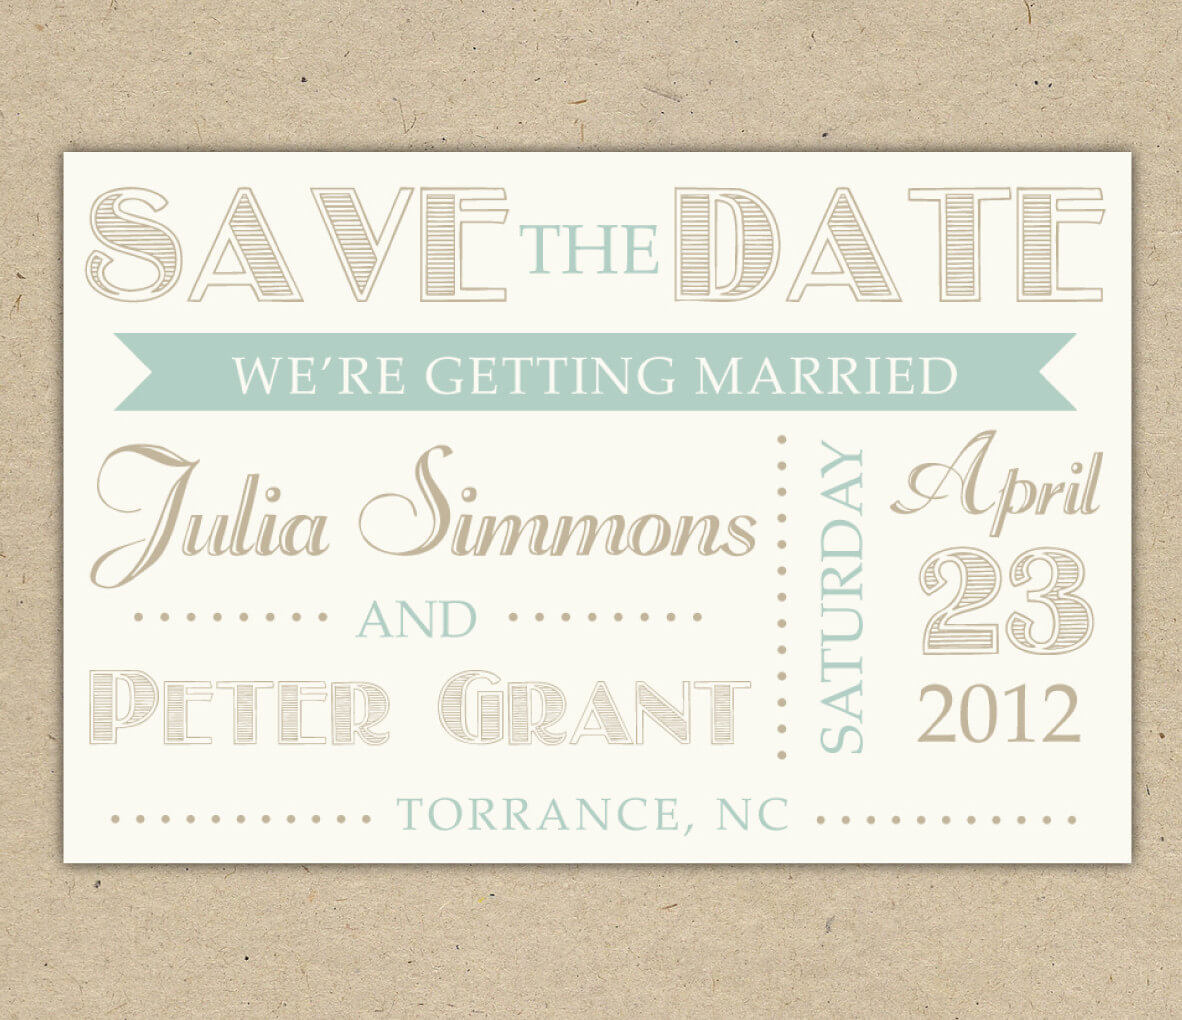 Save The Date Cards Templates For Weddings Inside Save The Date Cards Templates